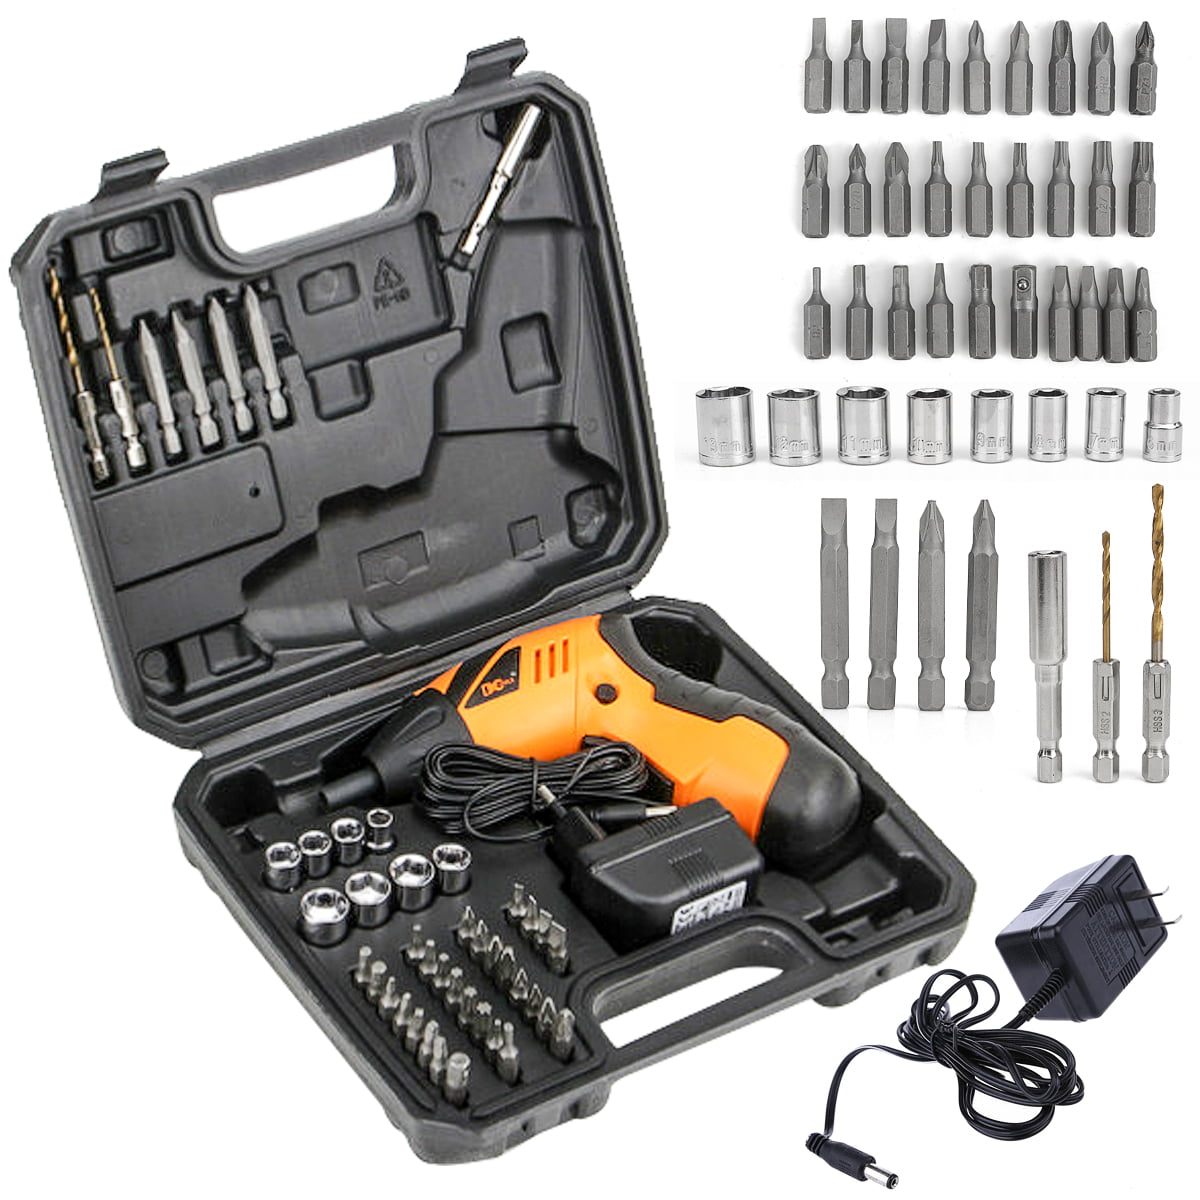 4.8V Best Seller Electric Rechargeable Cordless Power Screwdriver & Drill Set US 